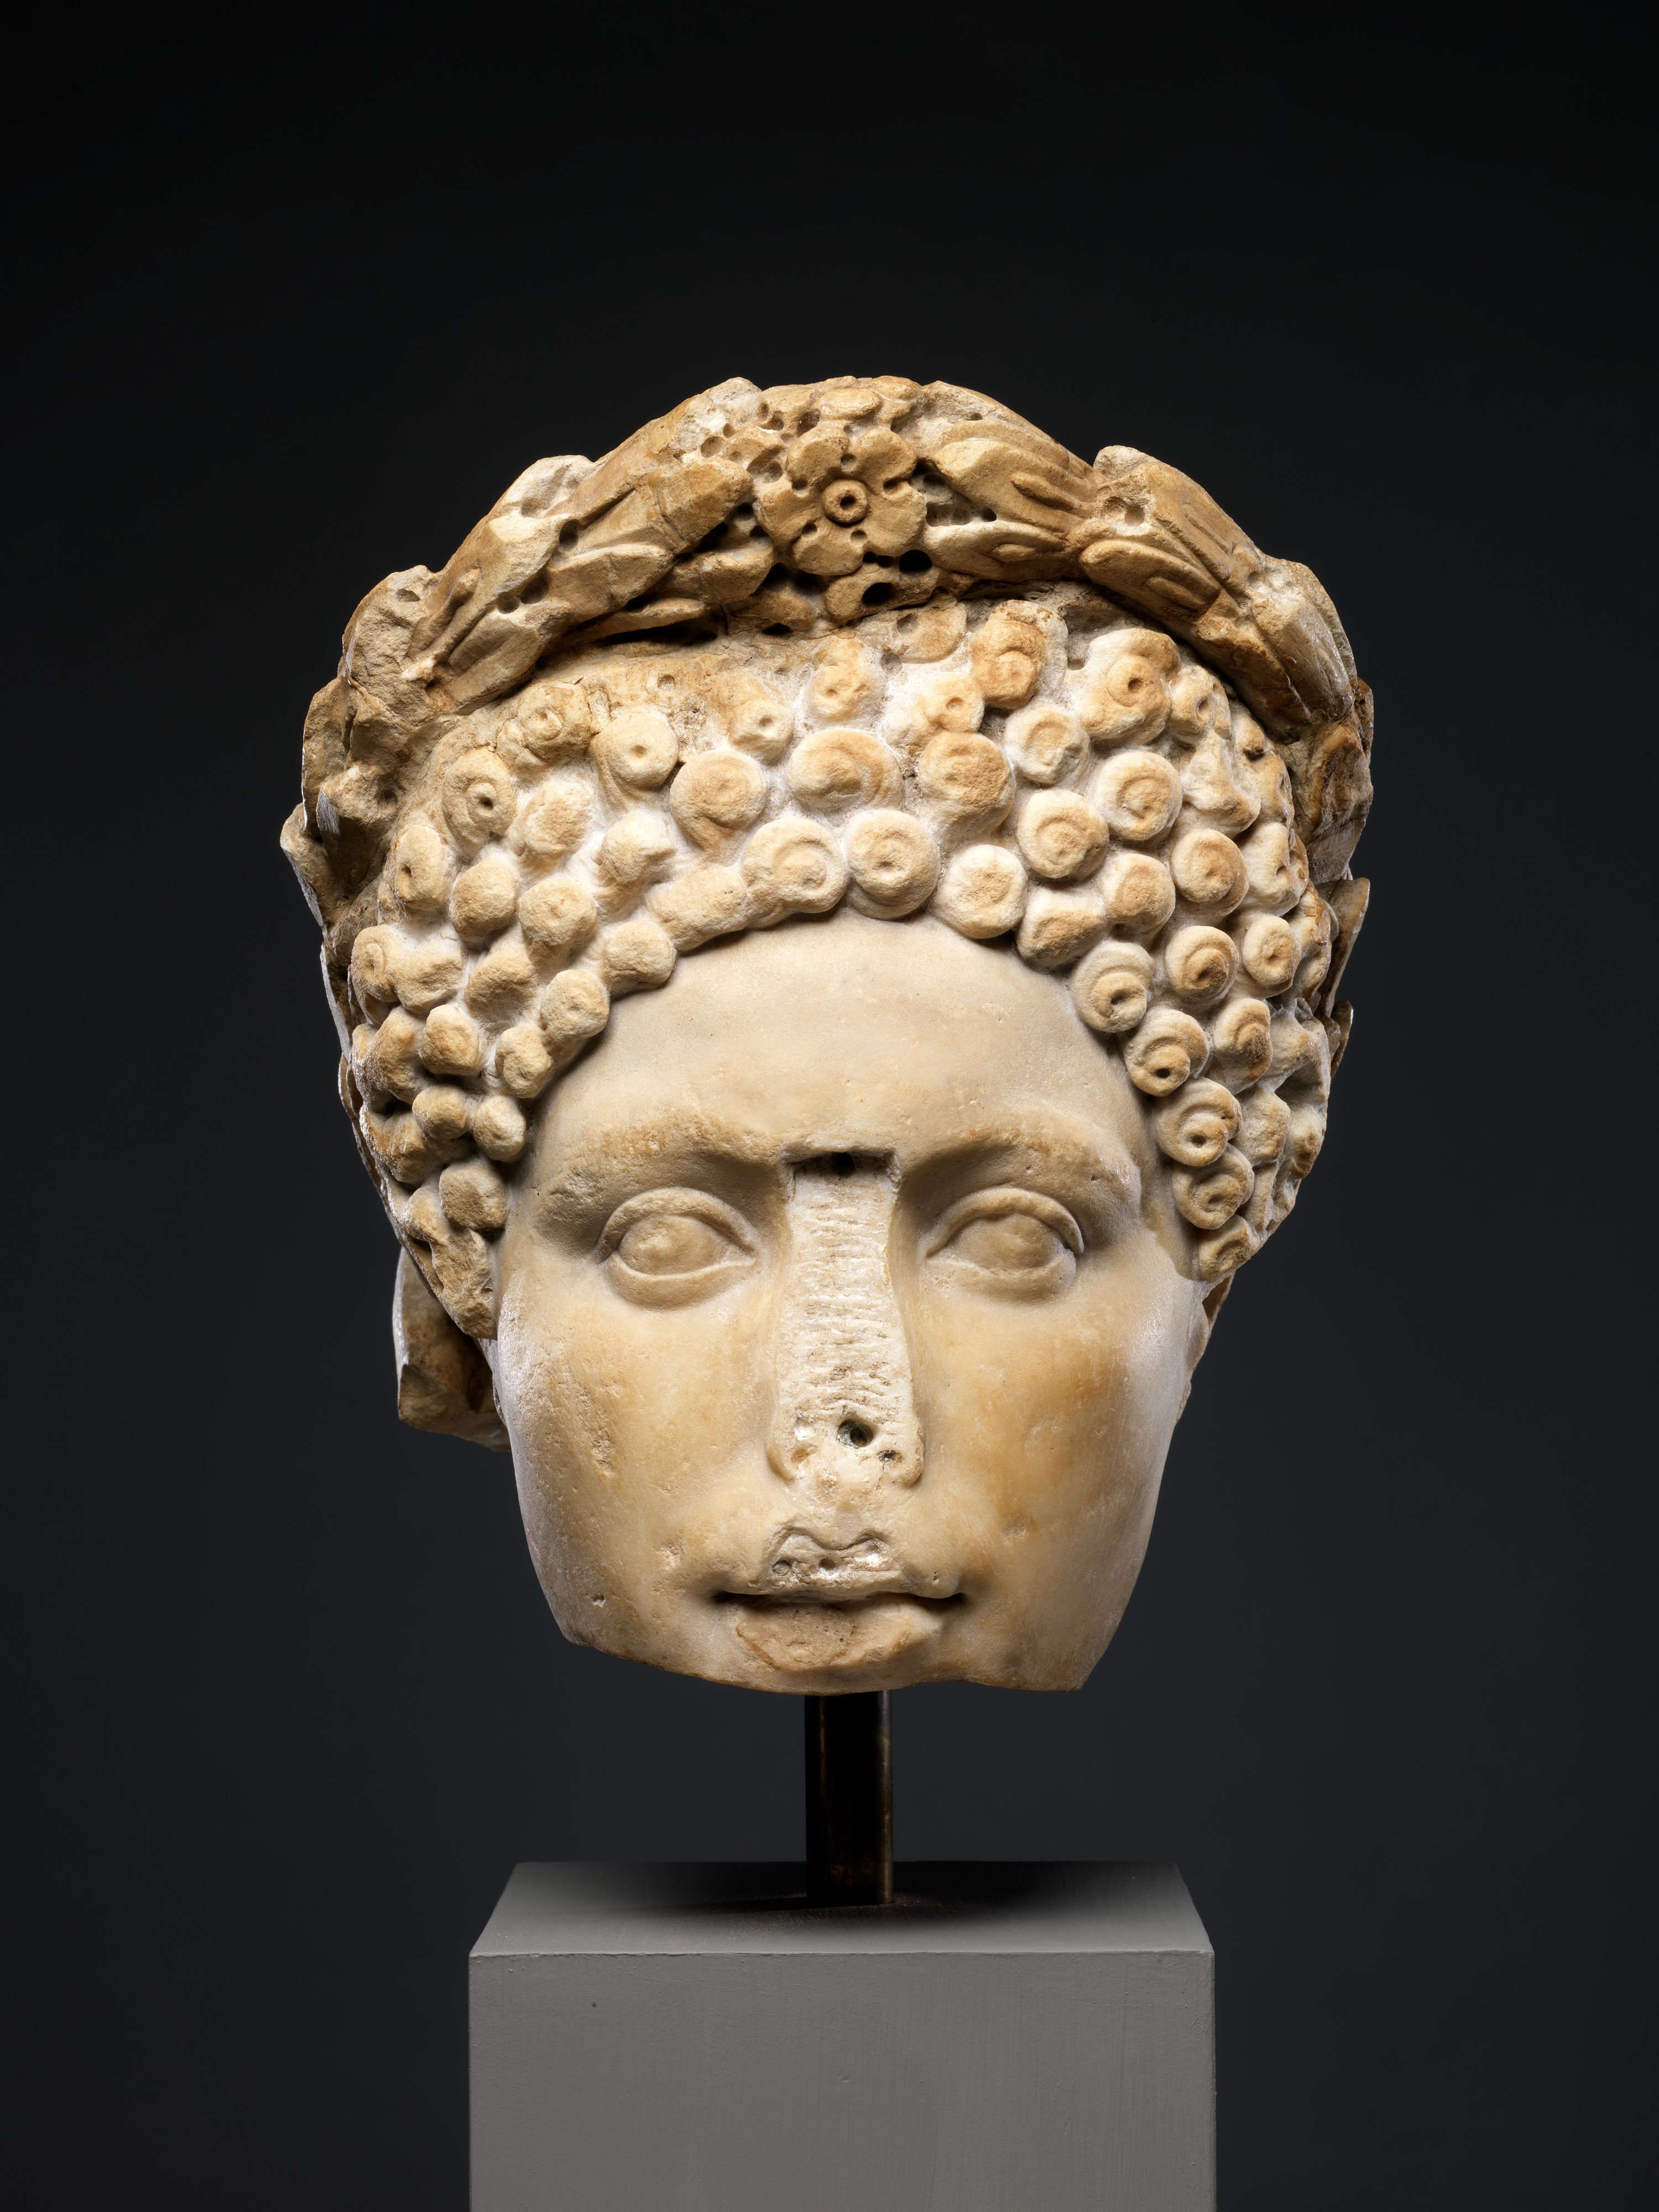 Portrait Head of a Woman from a Statue or Bust – NCMALearn